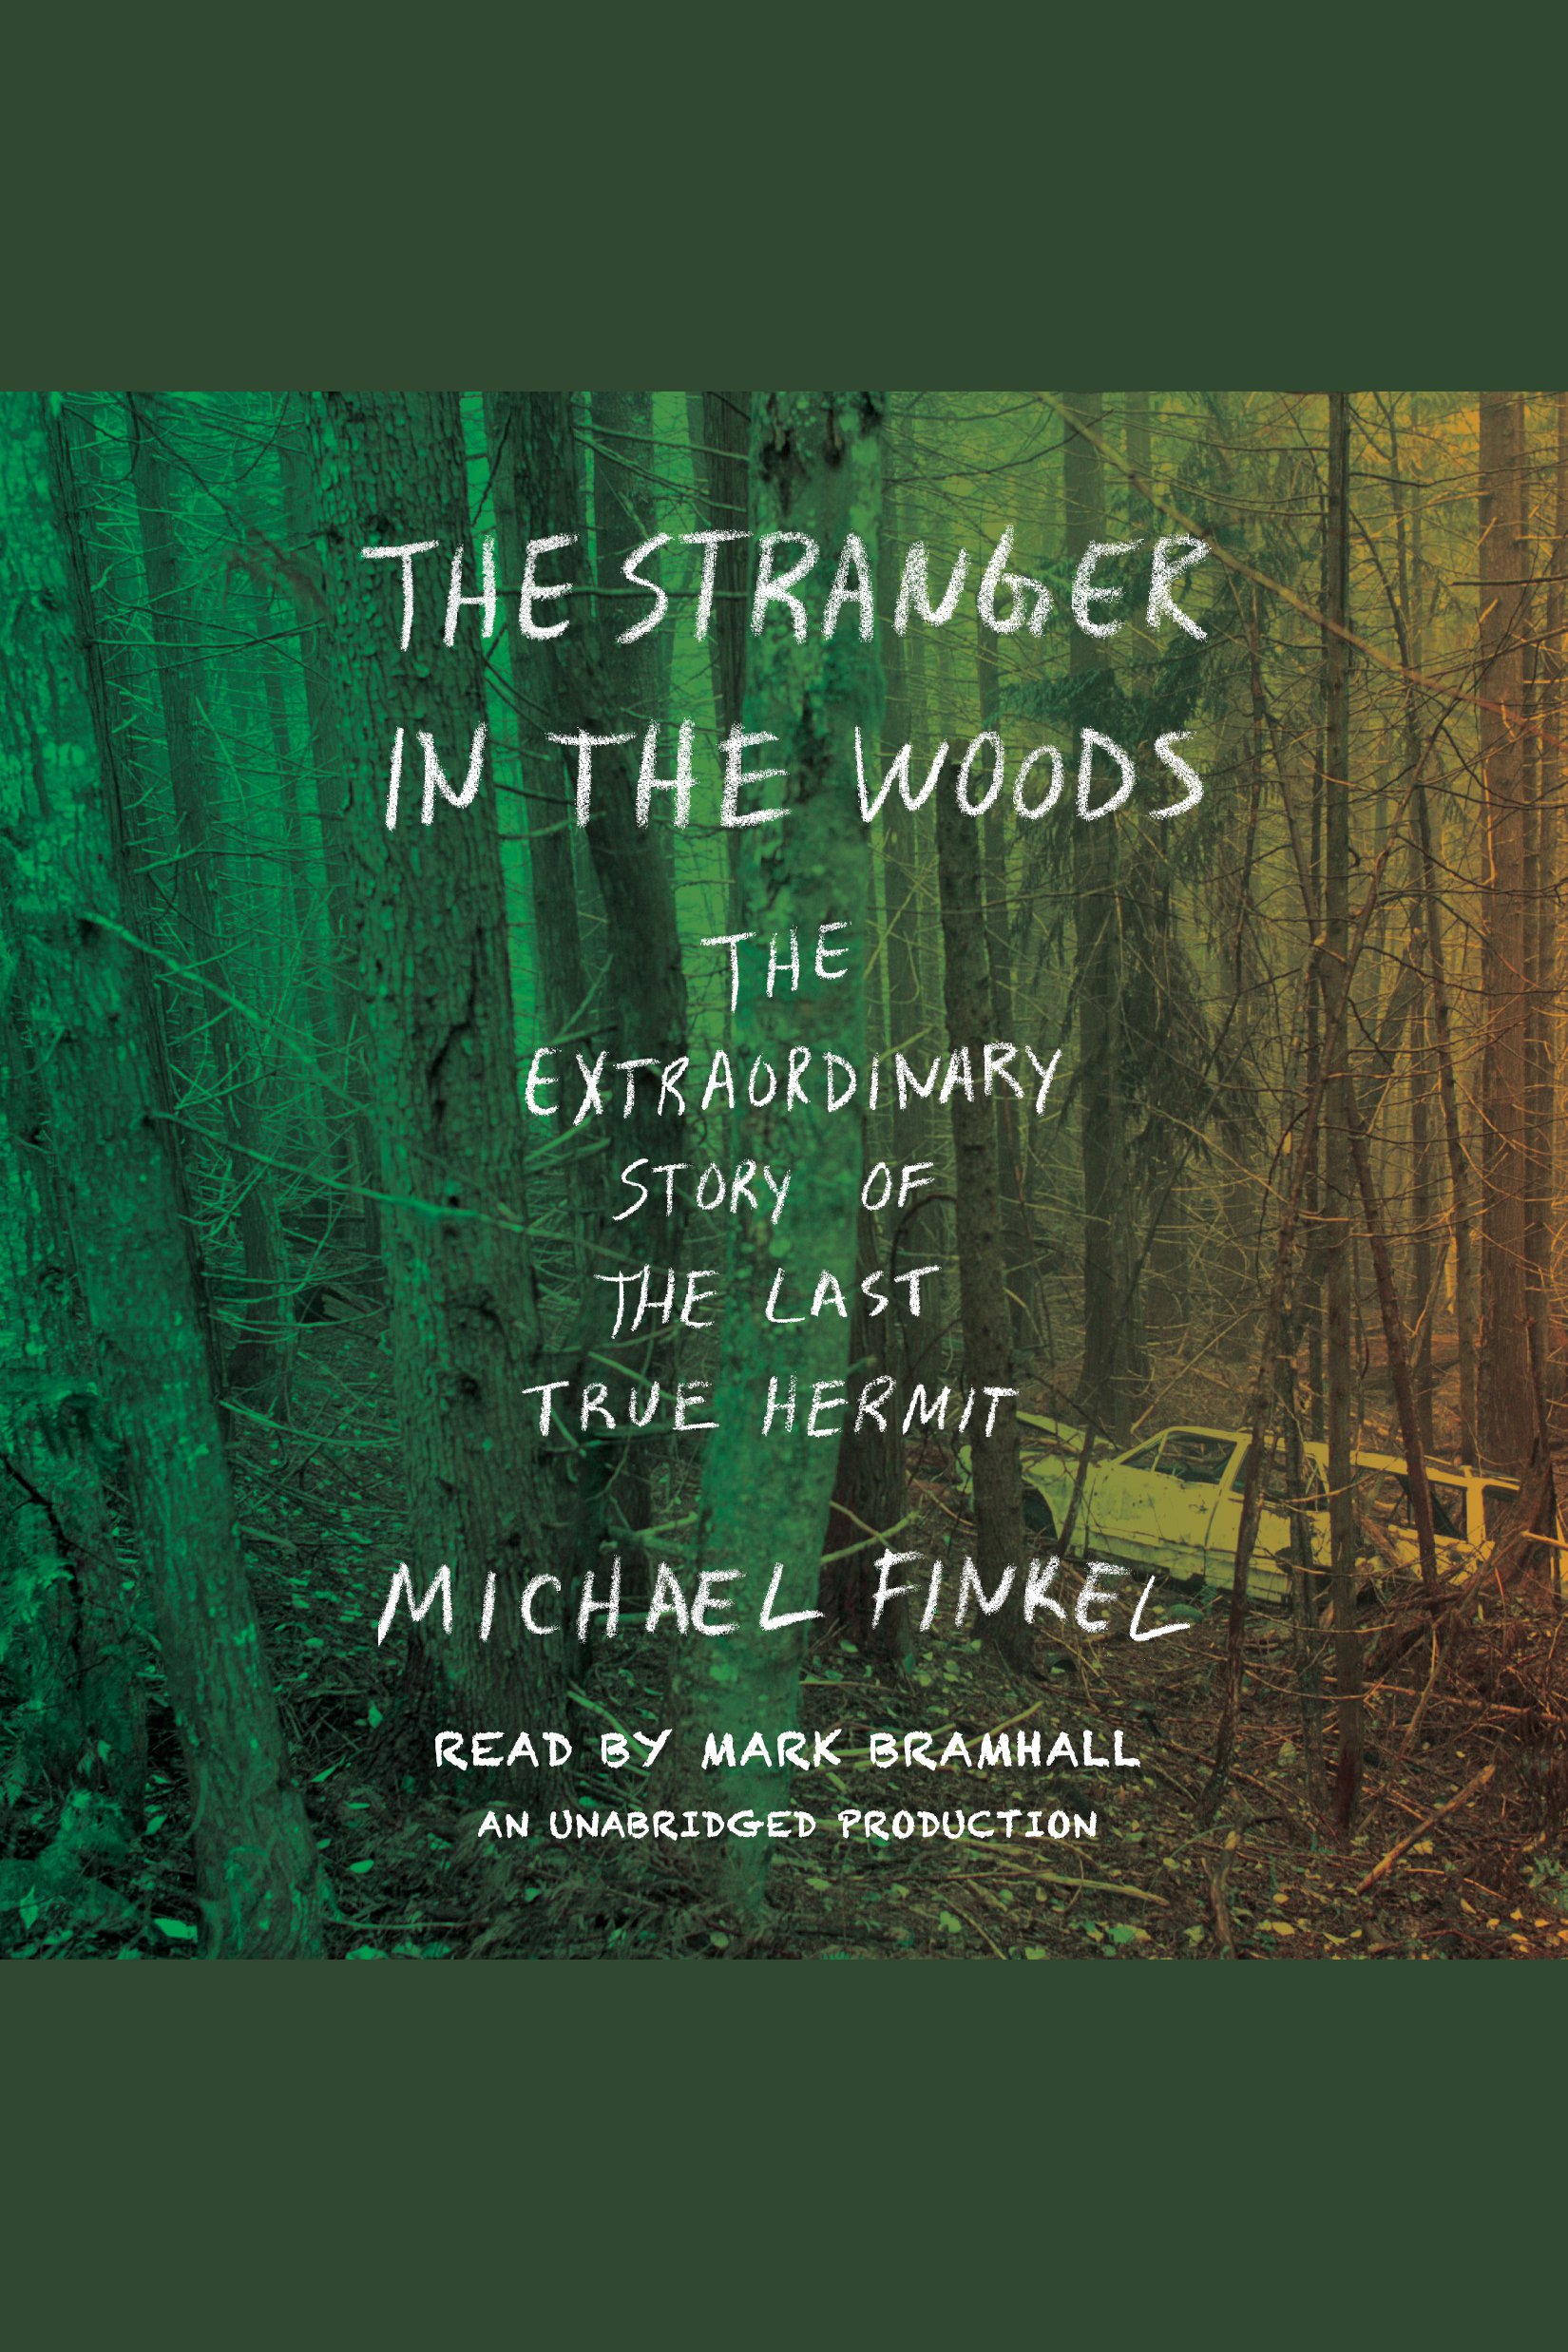 Image de couverture de The Stranger in the Woods [electronic resource] : The Extraordinary Story of the Last True Hermit